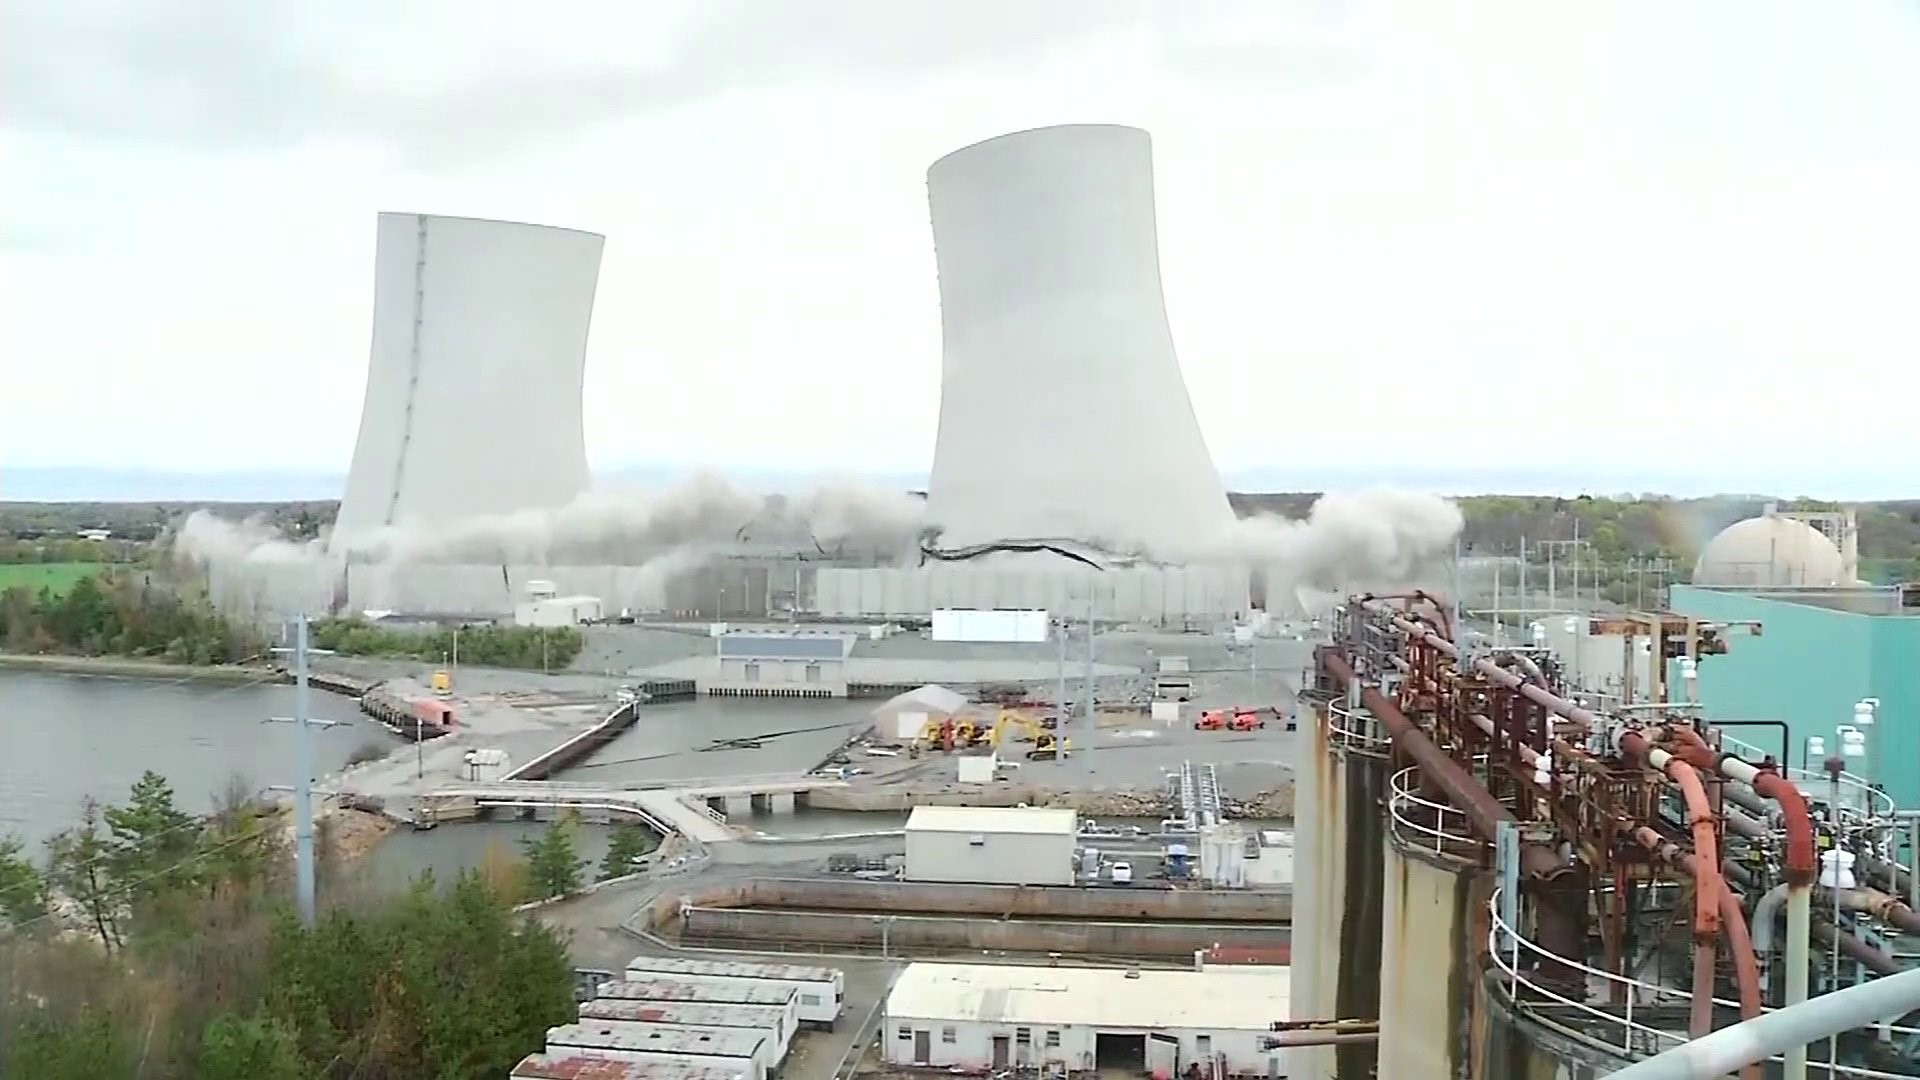 Somerset Cooling Tower Demolition VO w NATS